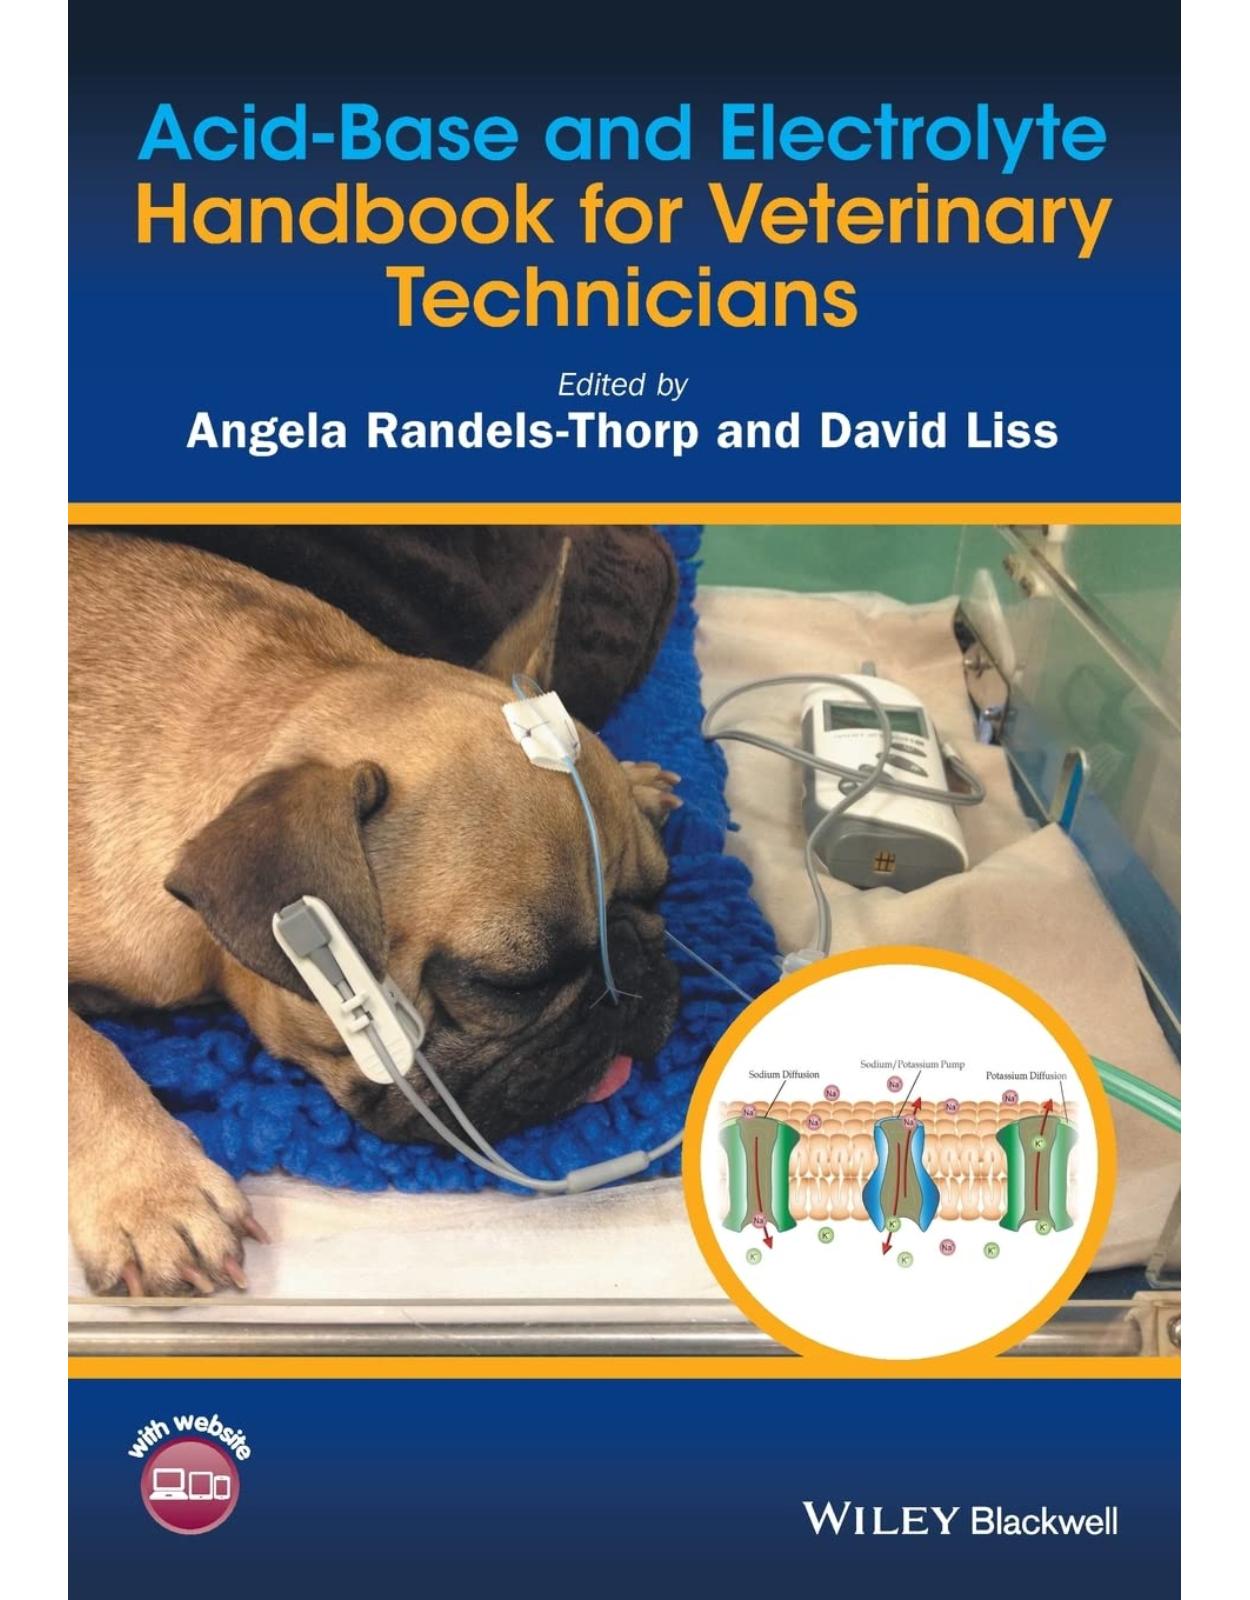 AcidBase and Electrolyte Handbook for Veterinary Technicians